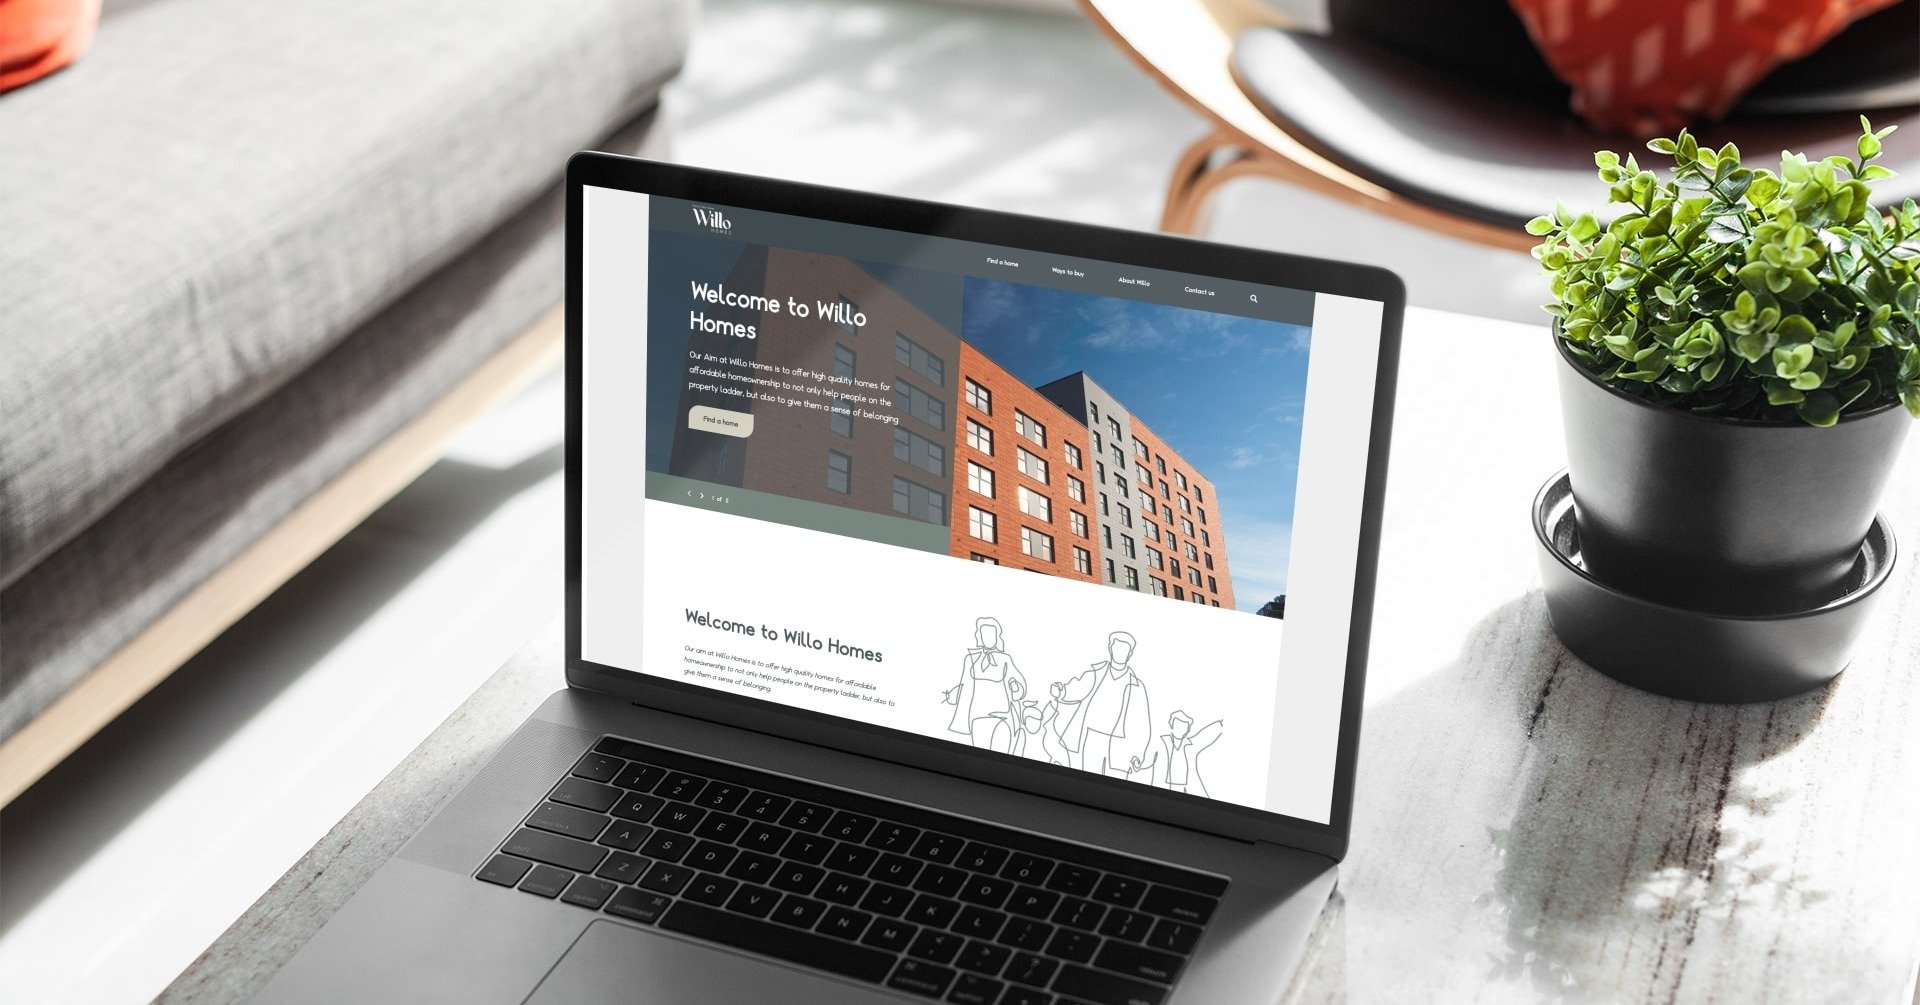 Salix Homes appoints Prodo to deliver their new affordable homes website